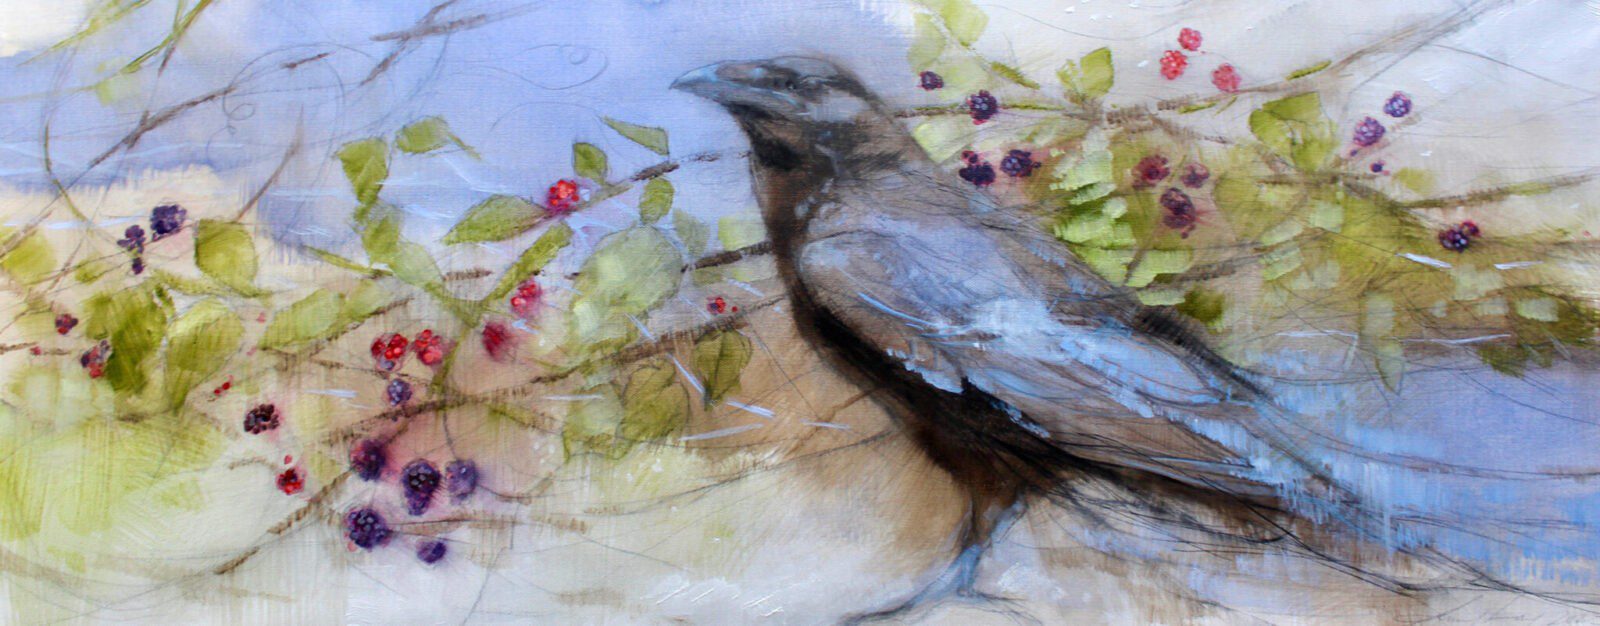 A painting of a crow on a branch with berries.